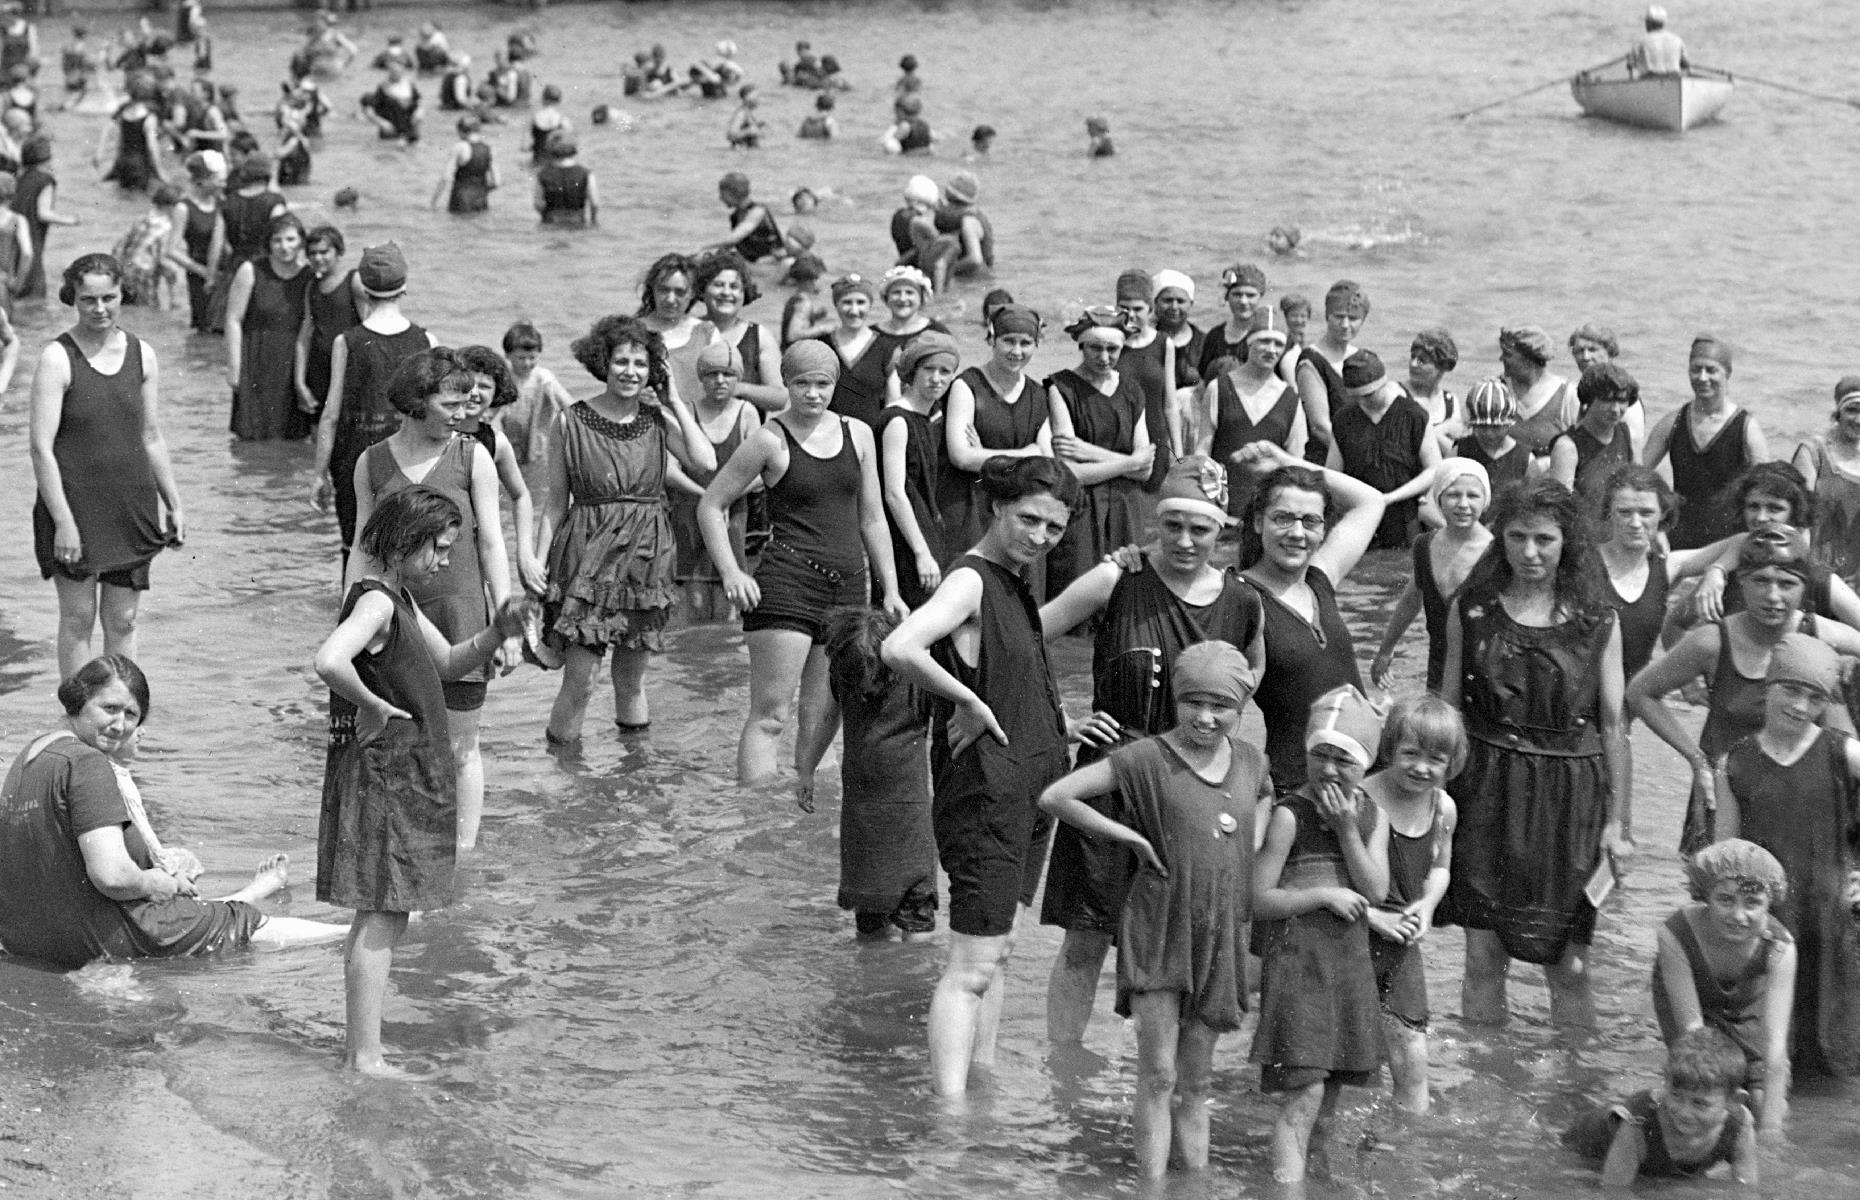 Less than two decades later and America's Atlantic shores look busier than ever. Snapped on a hot day circa 1919, this photo shows a large crowd of women and girls (in similar conservative dress) as they spill into the Atlantic Ocean off the coast of Massachusetts.